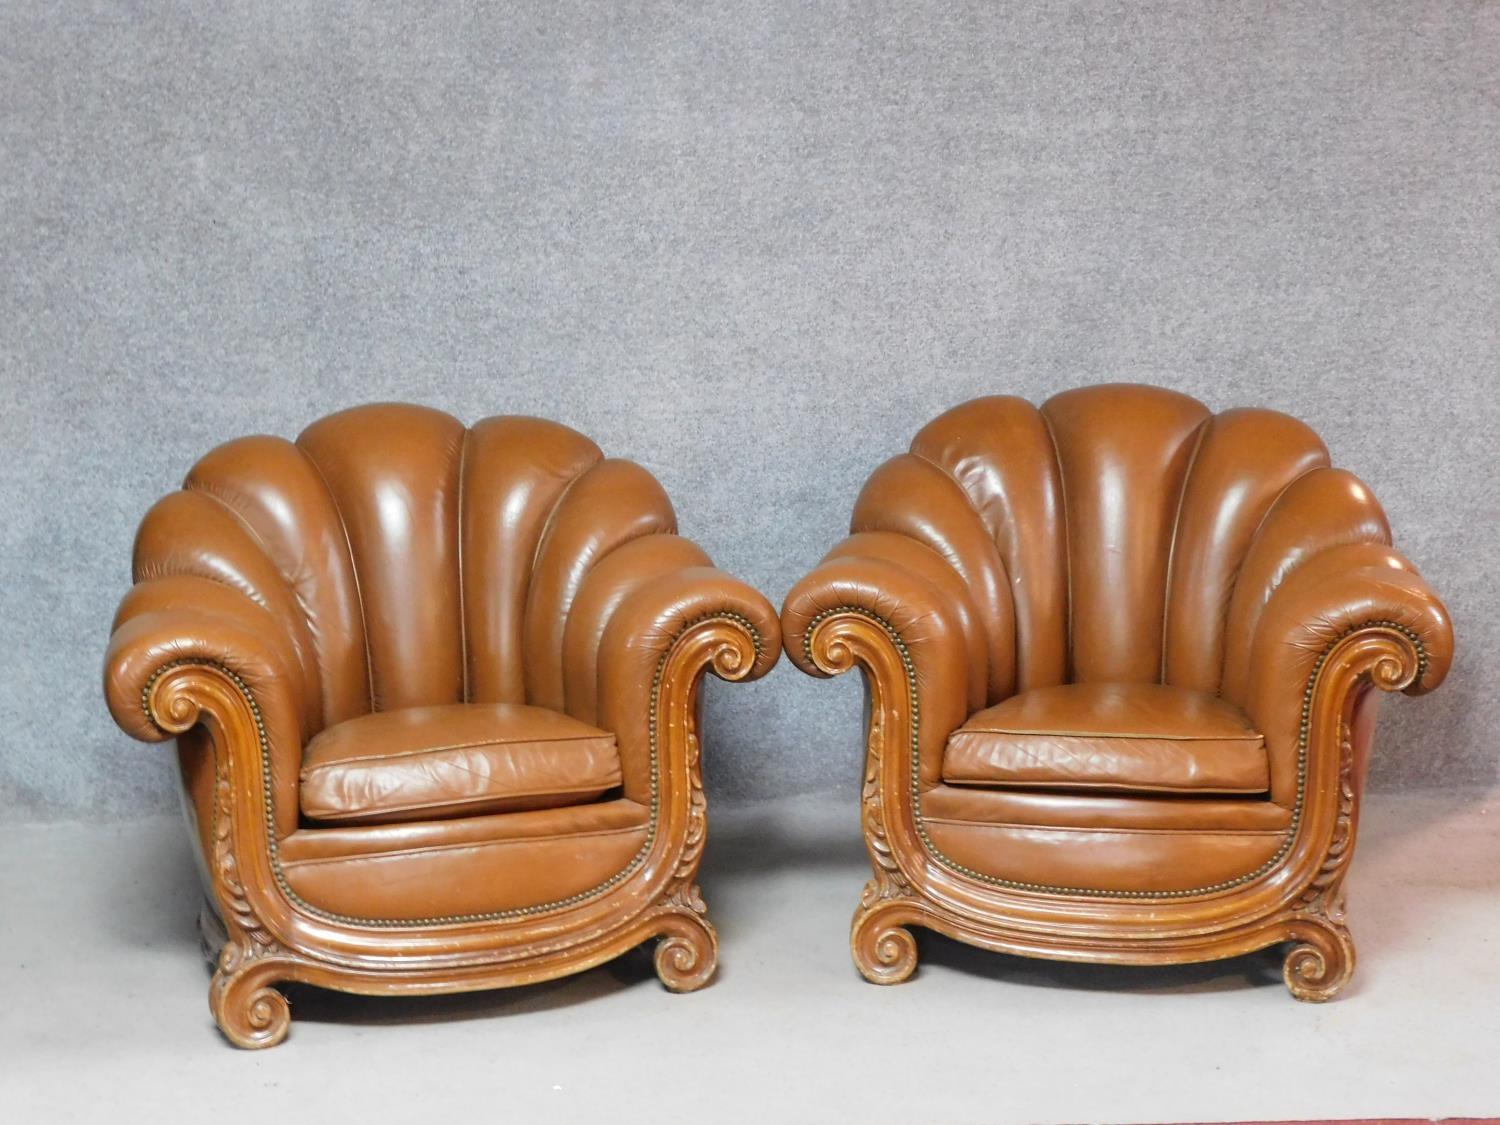 A pair of Italian walnut framed Arredo style armchairs in tan leather scalloped upholstery. H.80 W. - Image 2 of 5